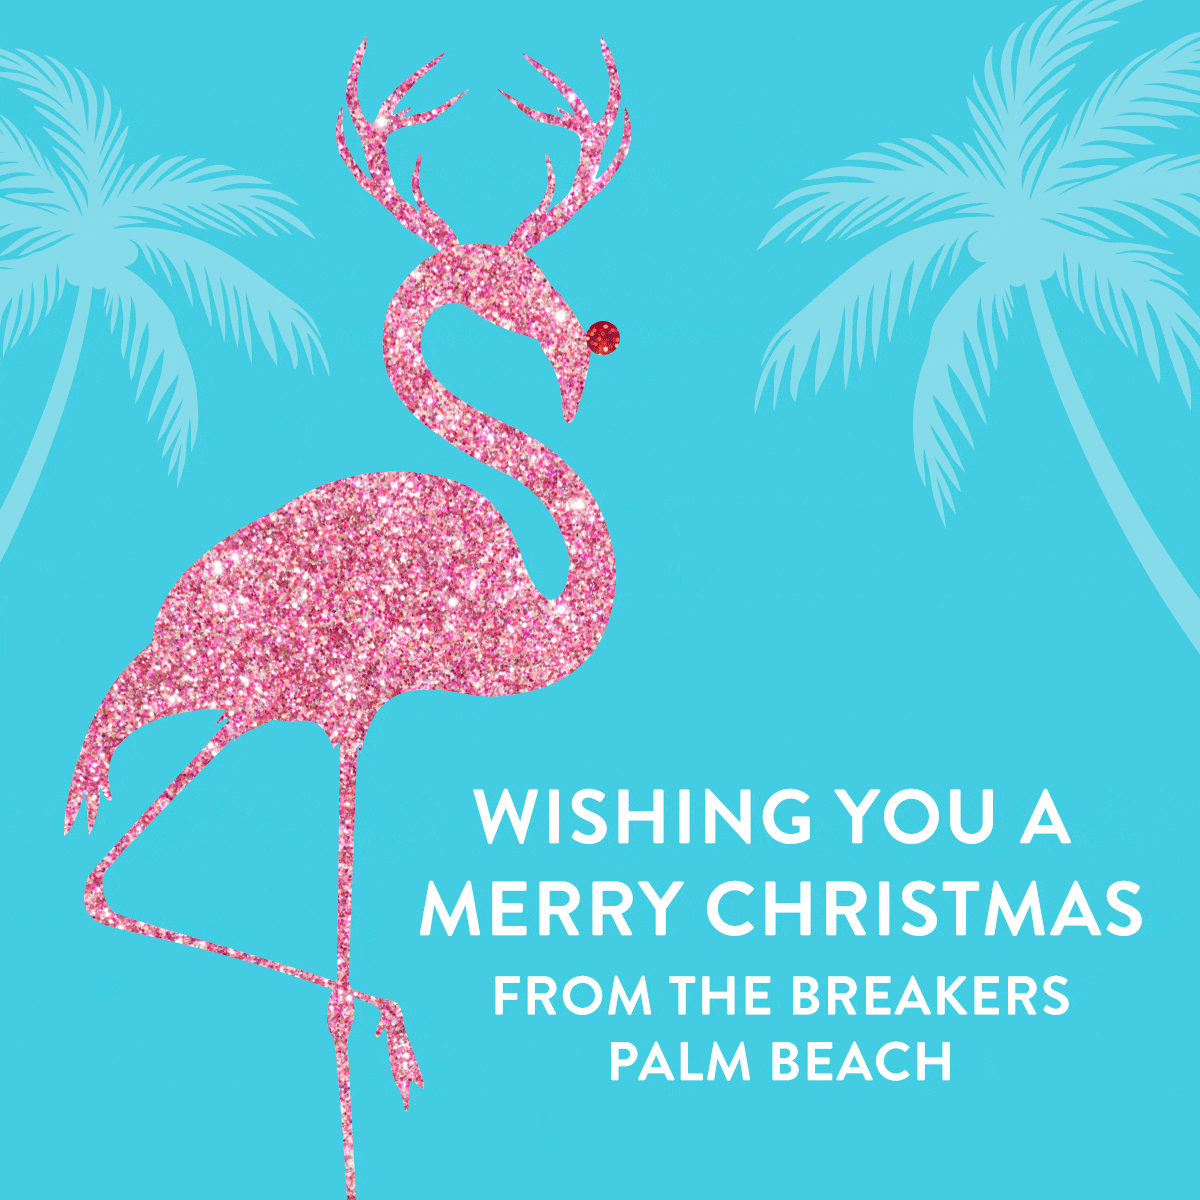 Merry Christmas from The Breakers Palm Beach